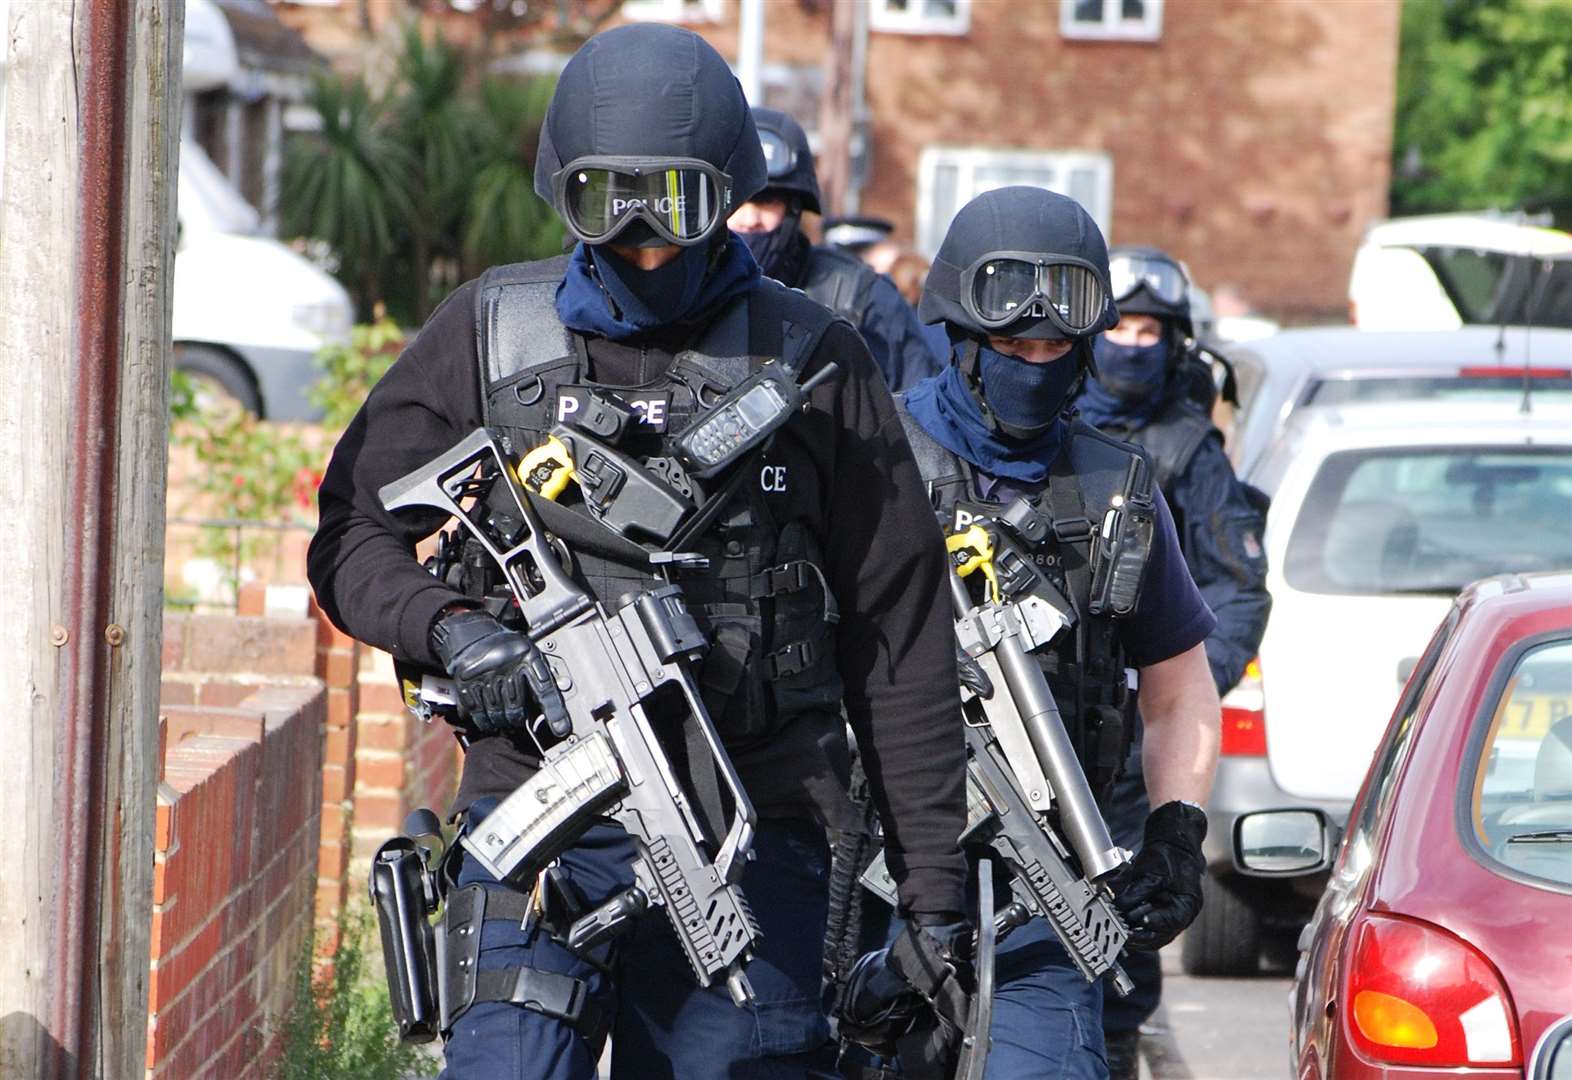 Armed police raid house in Marlborough Road, Gillingham after reports